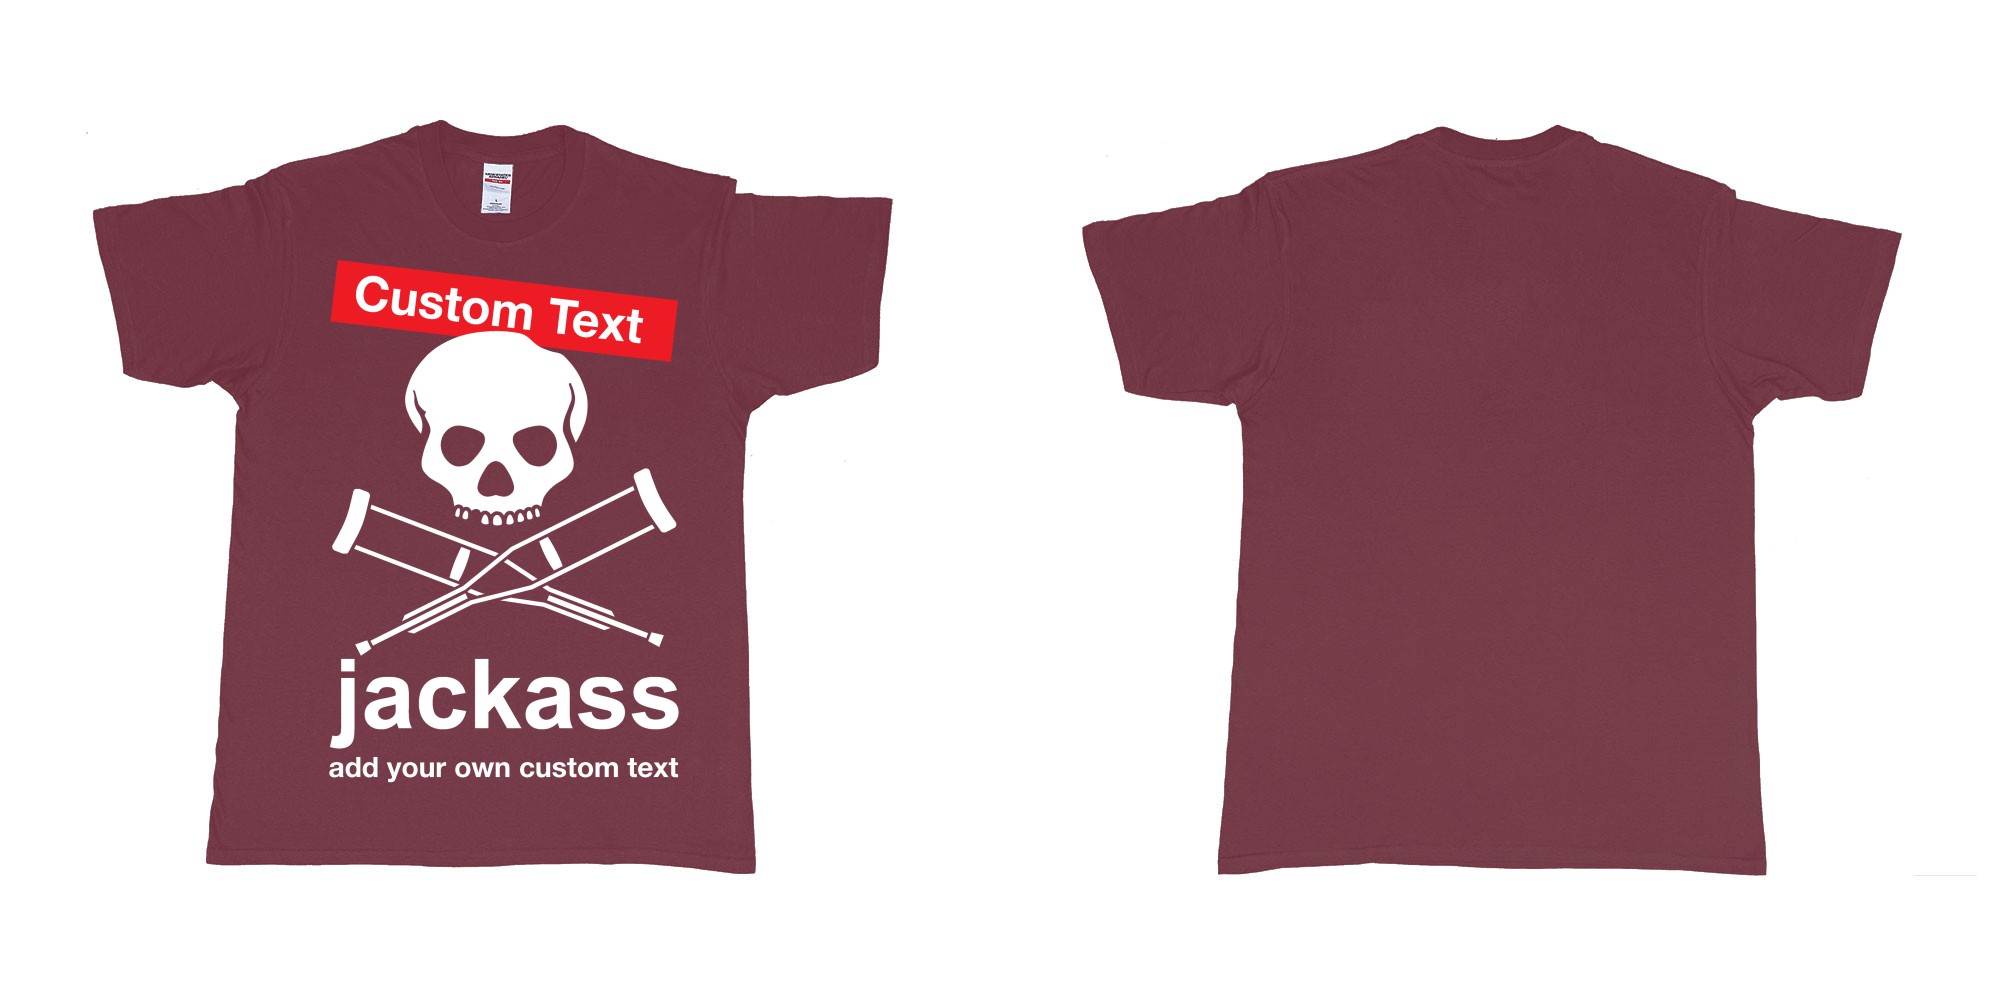 Custom tshirt design jackass skull and crutches own custom print in fabric color marron choice your own text made in Bali by The Pirate Way